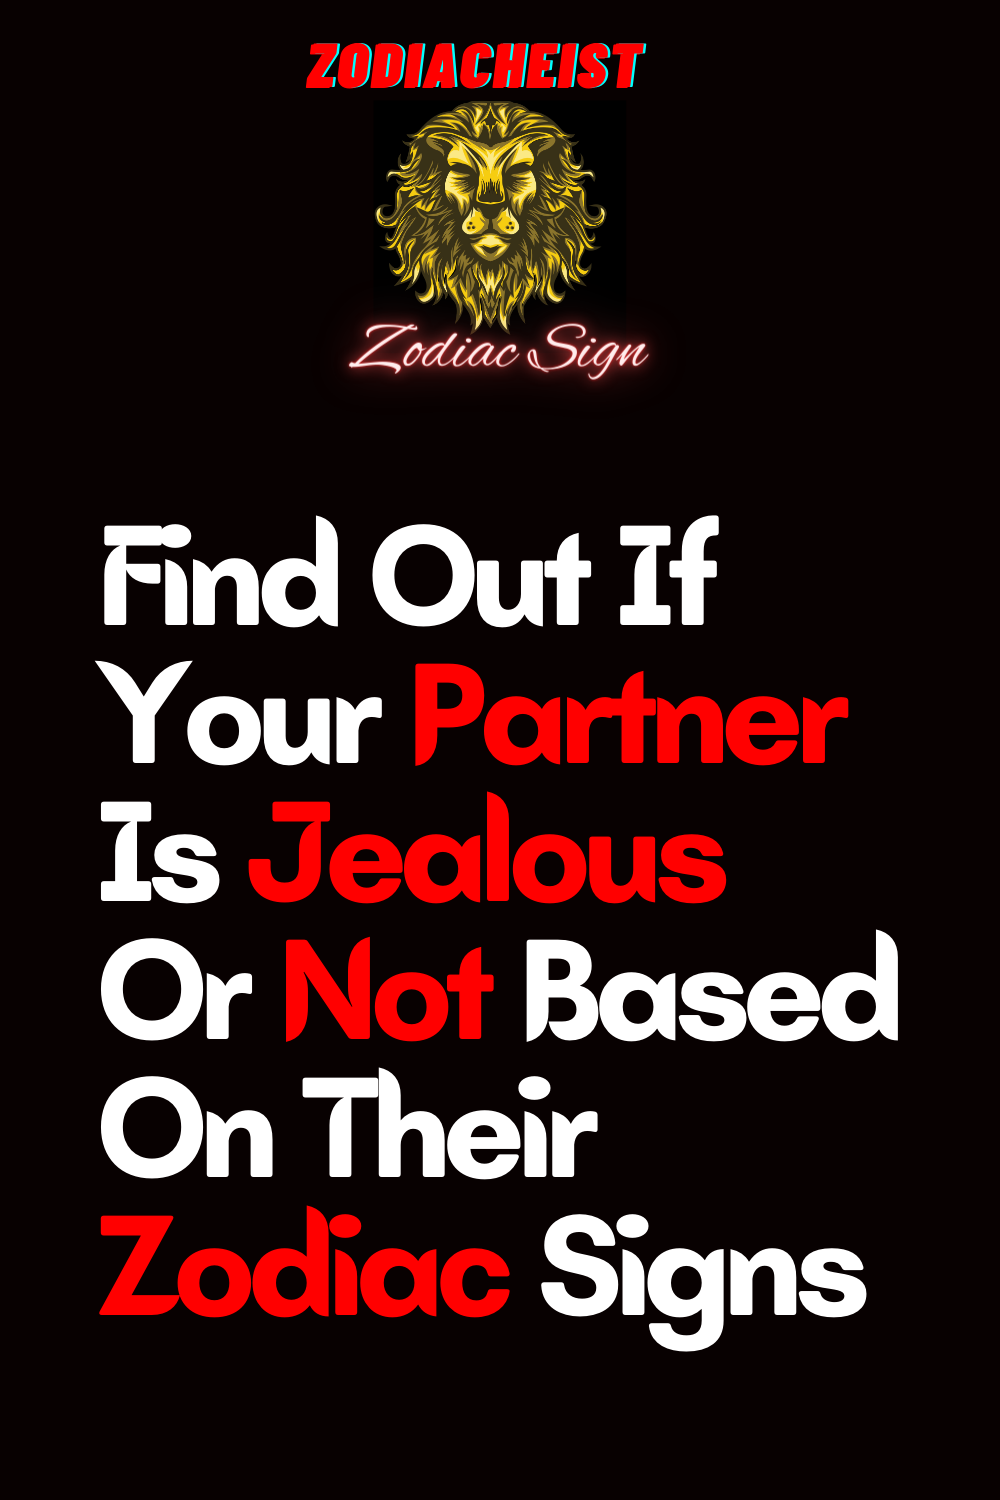 Find Out If Your Partner Is Jealous Or Not Based On Their Zodiac Signs ...